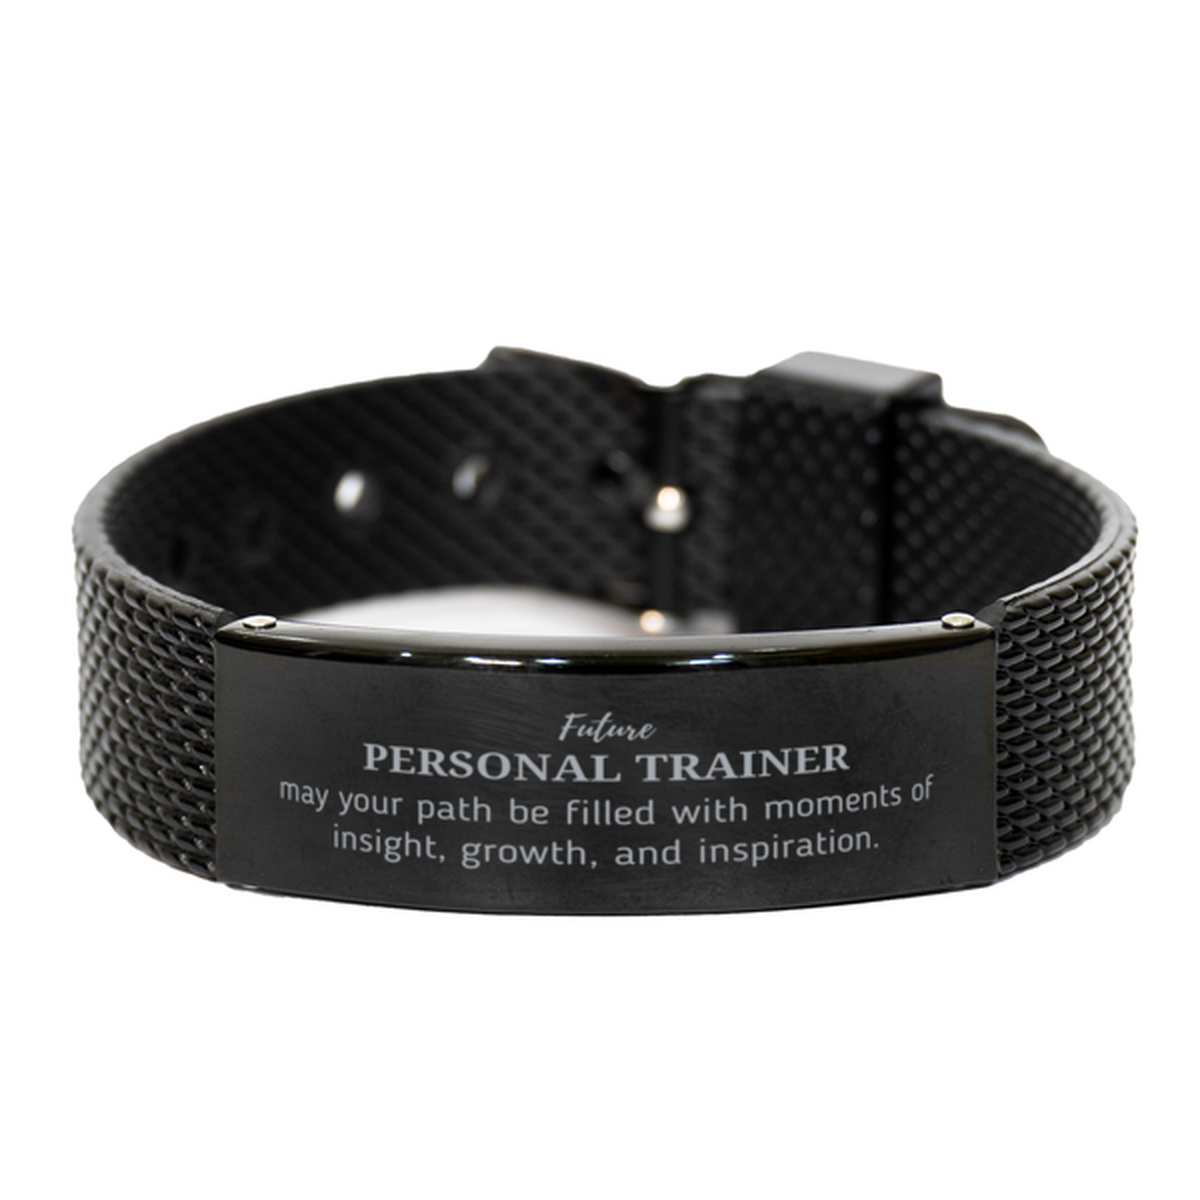 Future Personal Trainer Gifts, May your path be filled with moments of insight, Graduation Gifts for New Personal Trainer, Christmas Unique Black Shark Mesh Bracelet For Men, Women, Friends